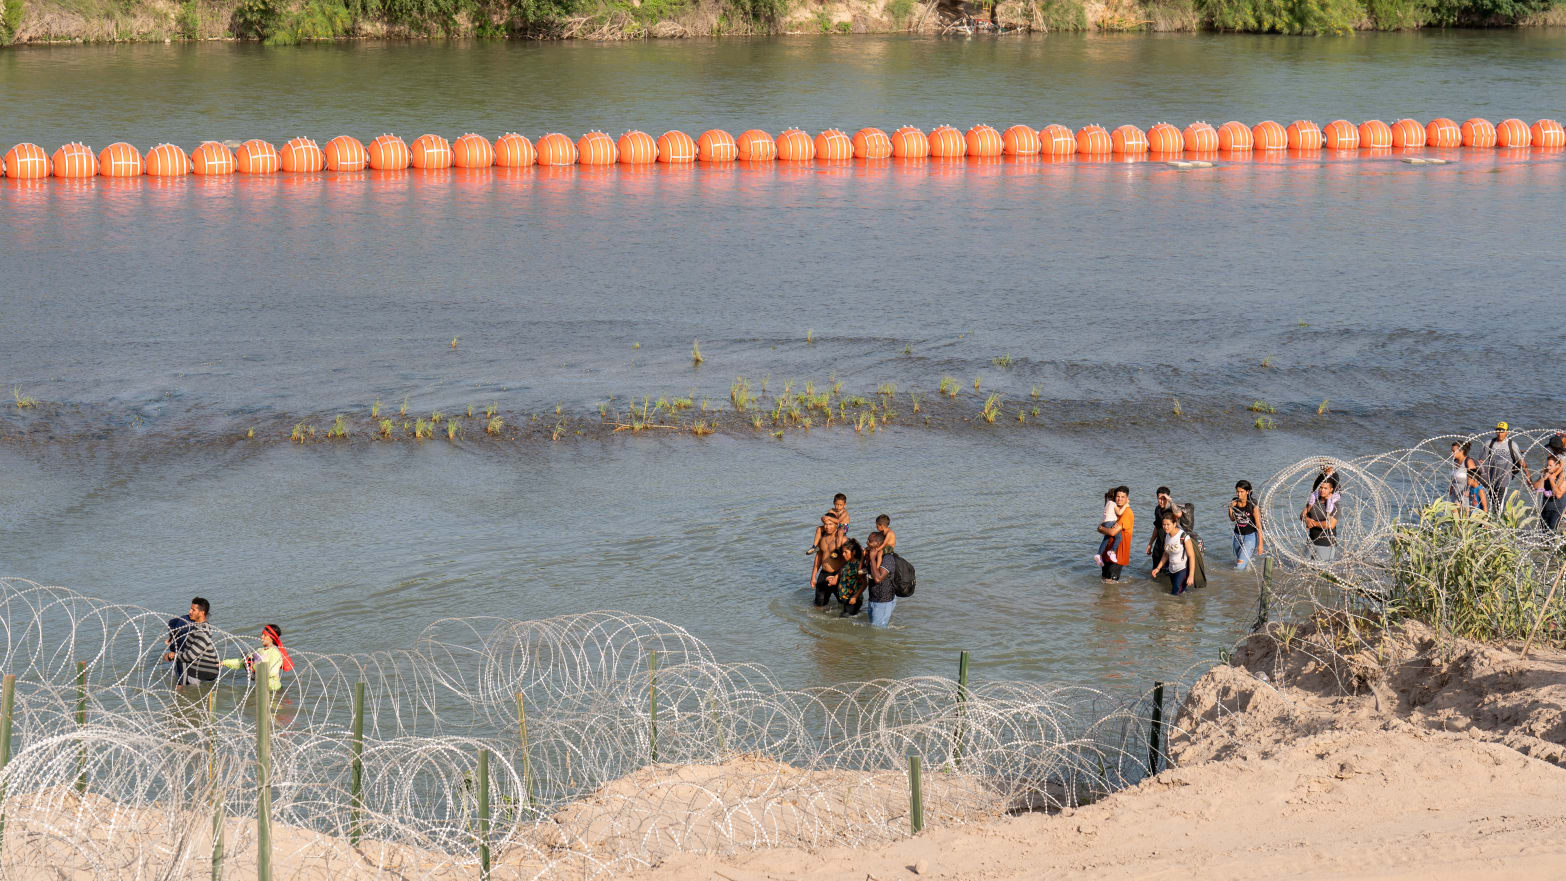 Migrants walk by a string of buoys placed on the water along the Rio Grande border with Mexico in Eagle Pass, Texas.